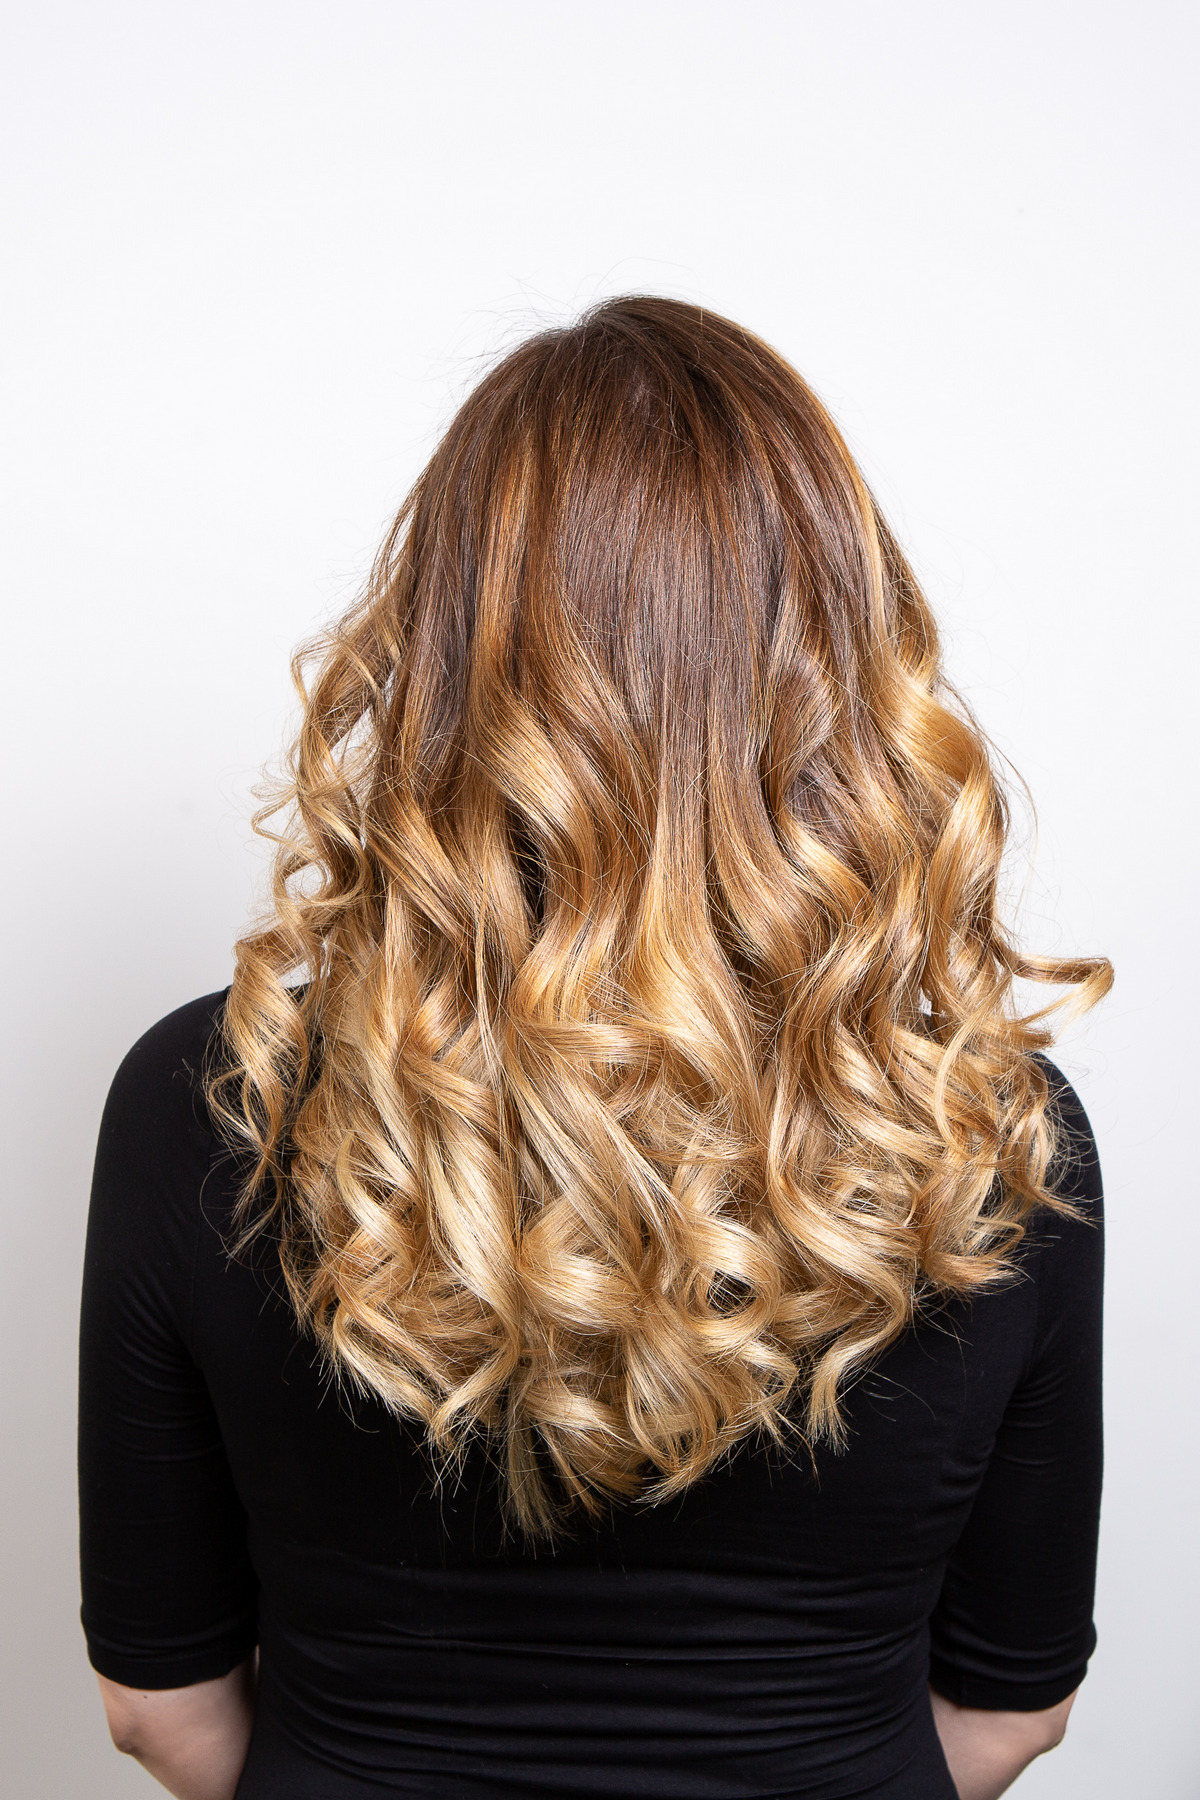 Back part of the hair of a young blond-haired woman with a balayage effect